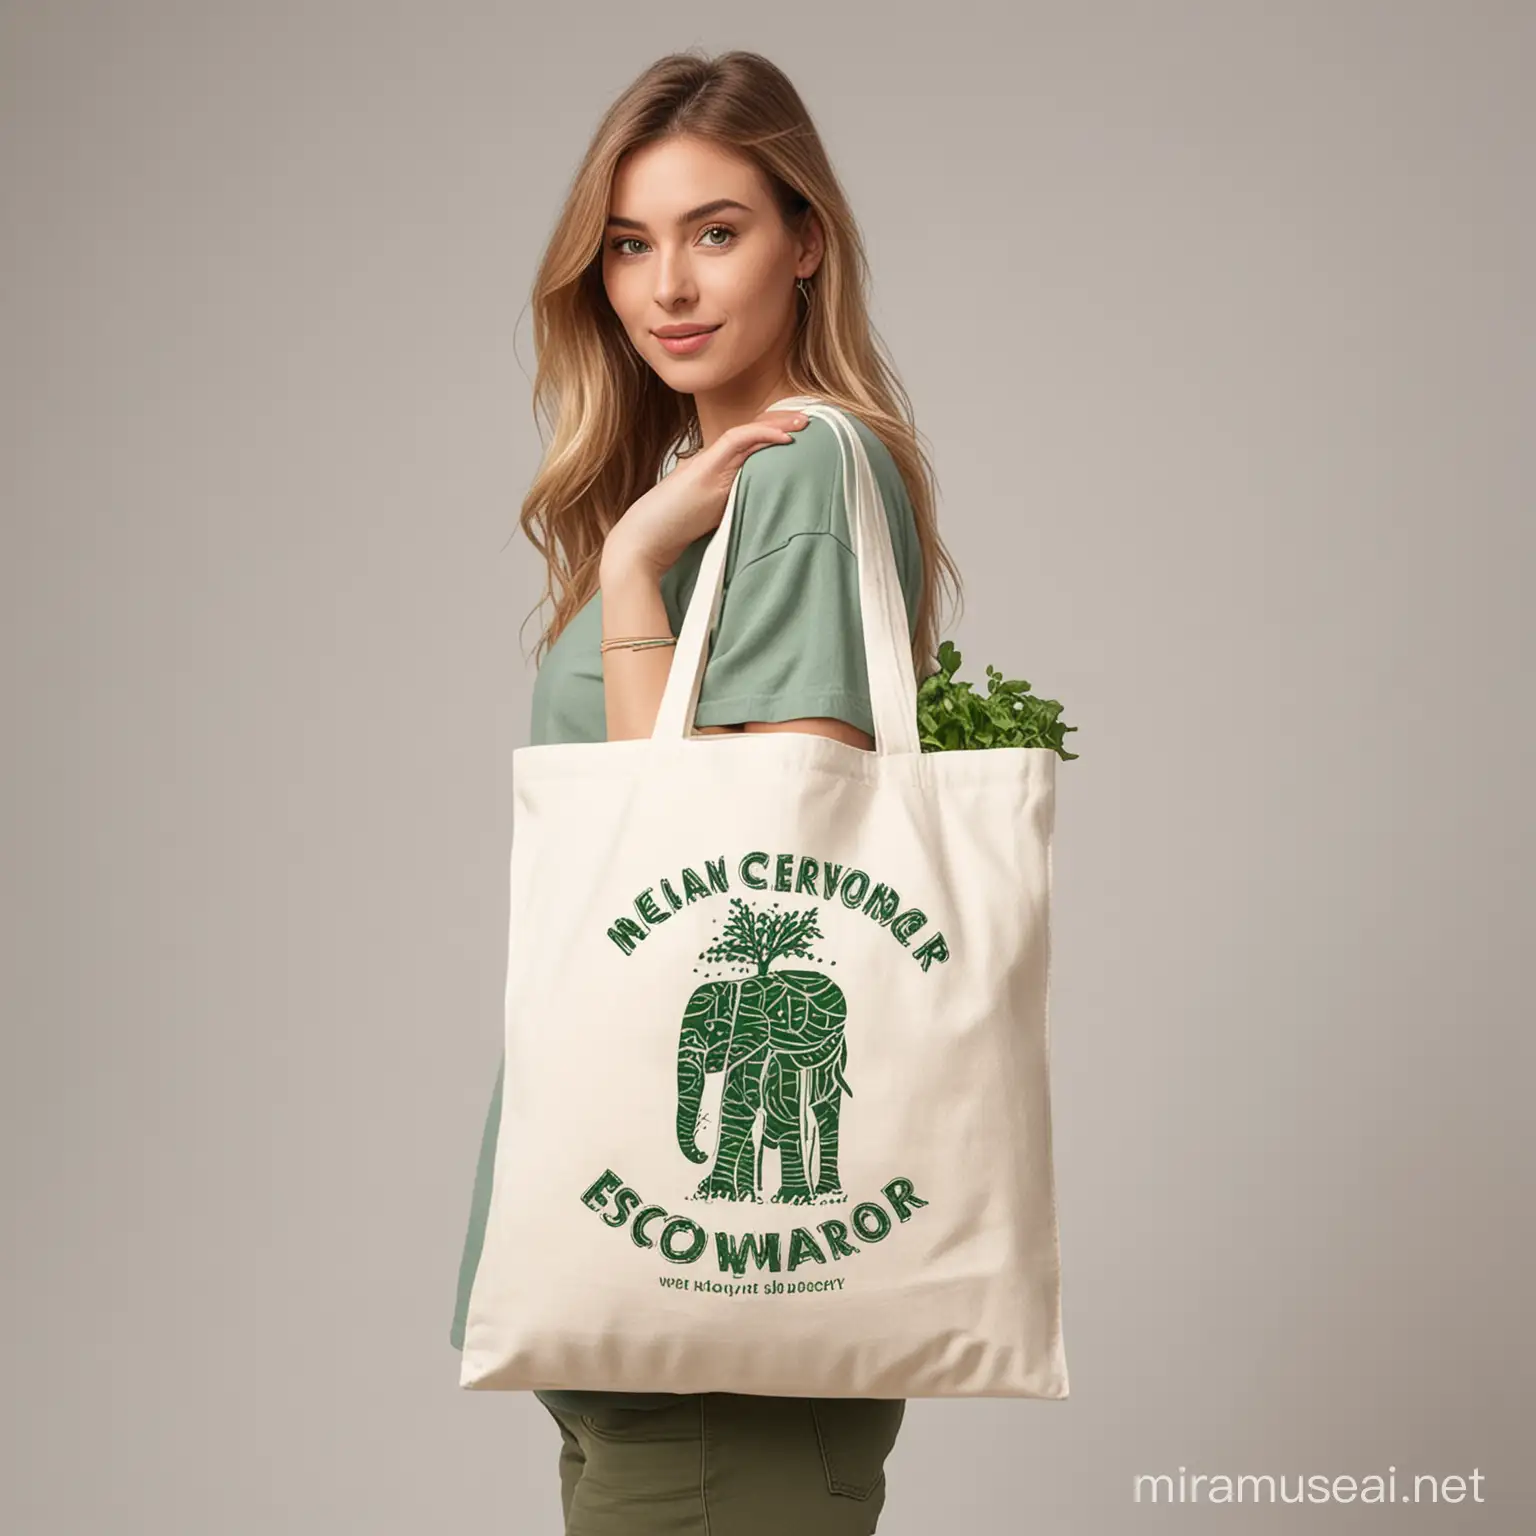 Trendy EcoWarrior with Sustainable Tote Bag in Minimalist Setting